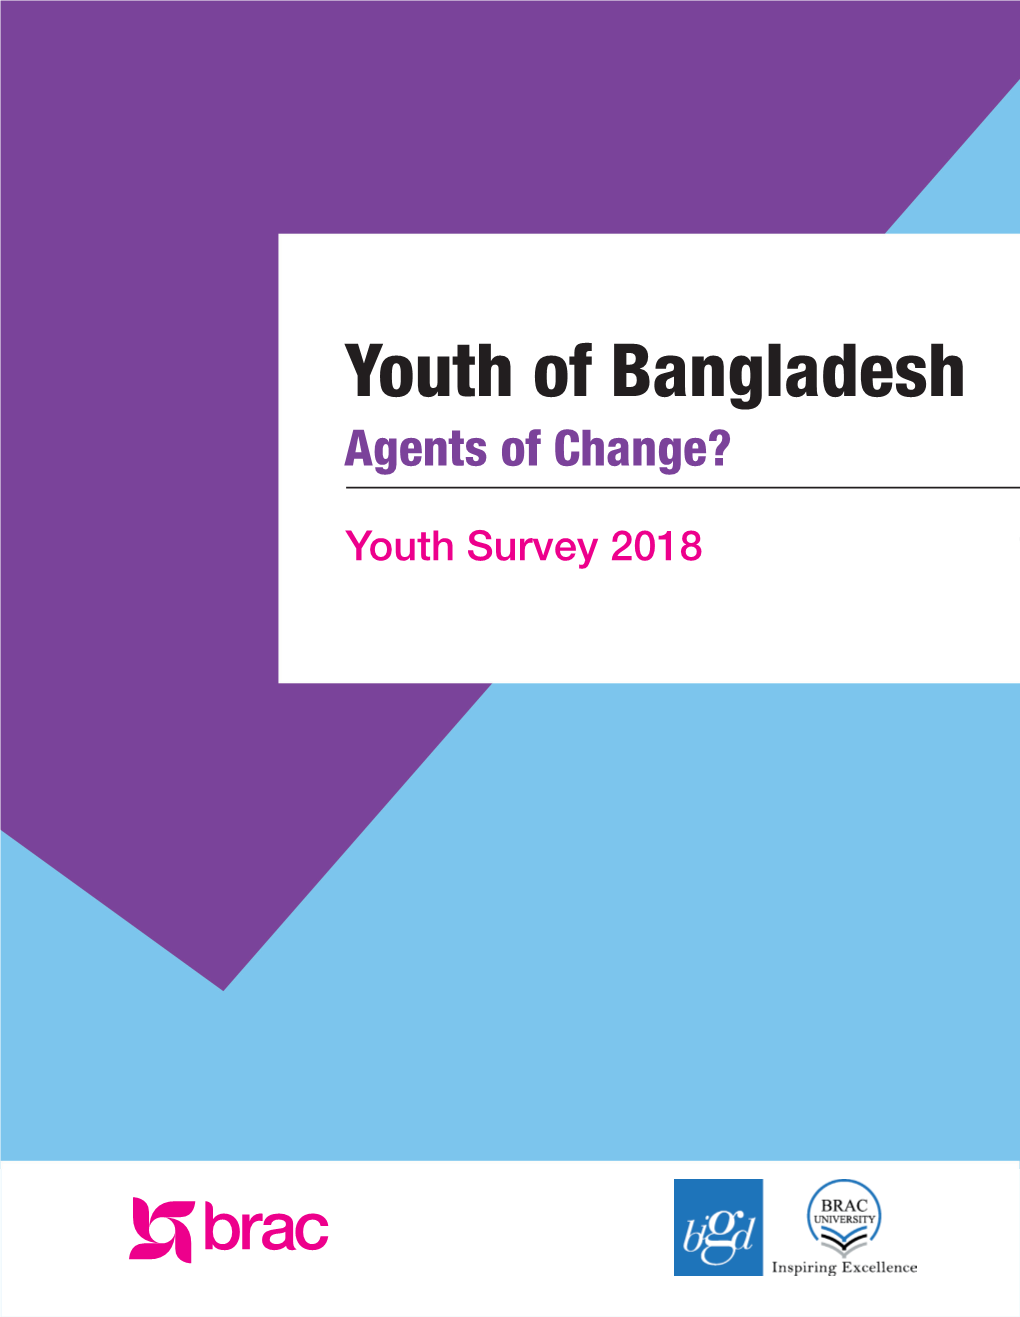 Youth Survey: Youth of Bangladesh; Agents of Change